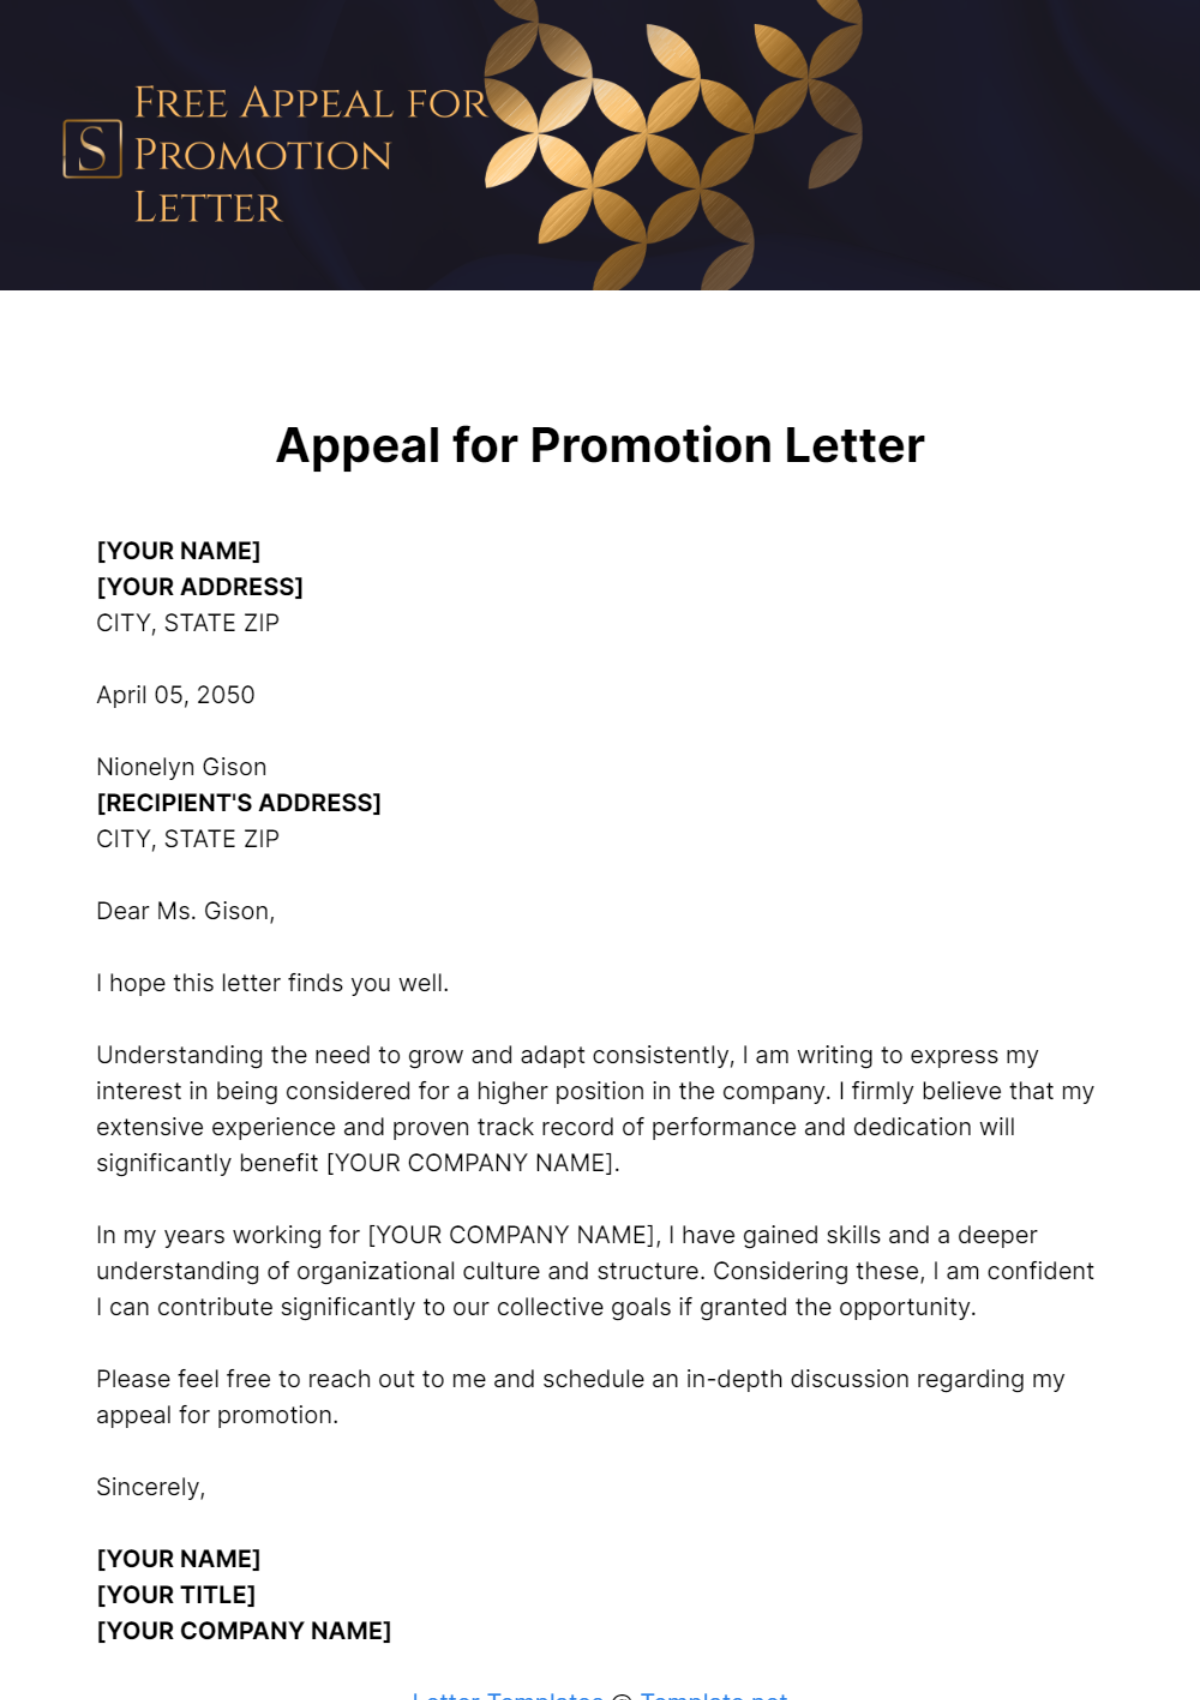 Free Appeal for Promotion Letter Template